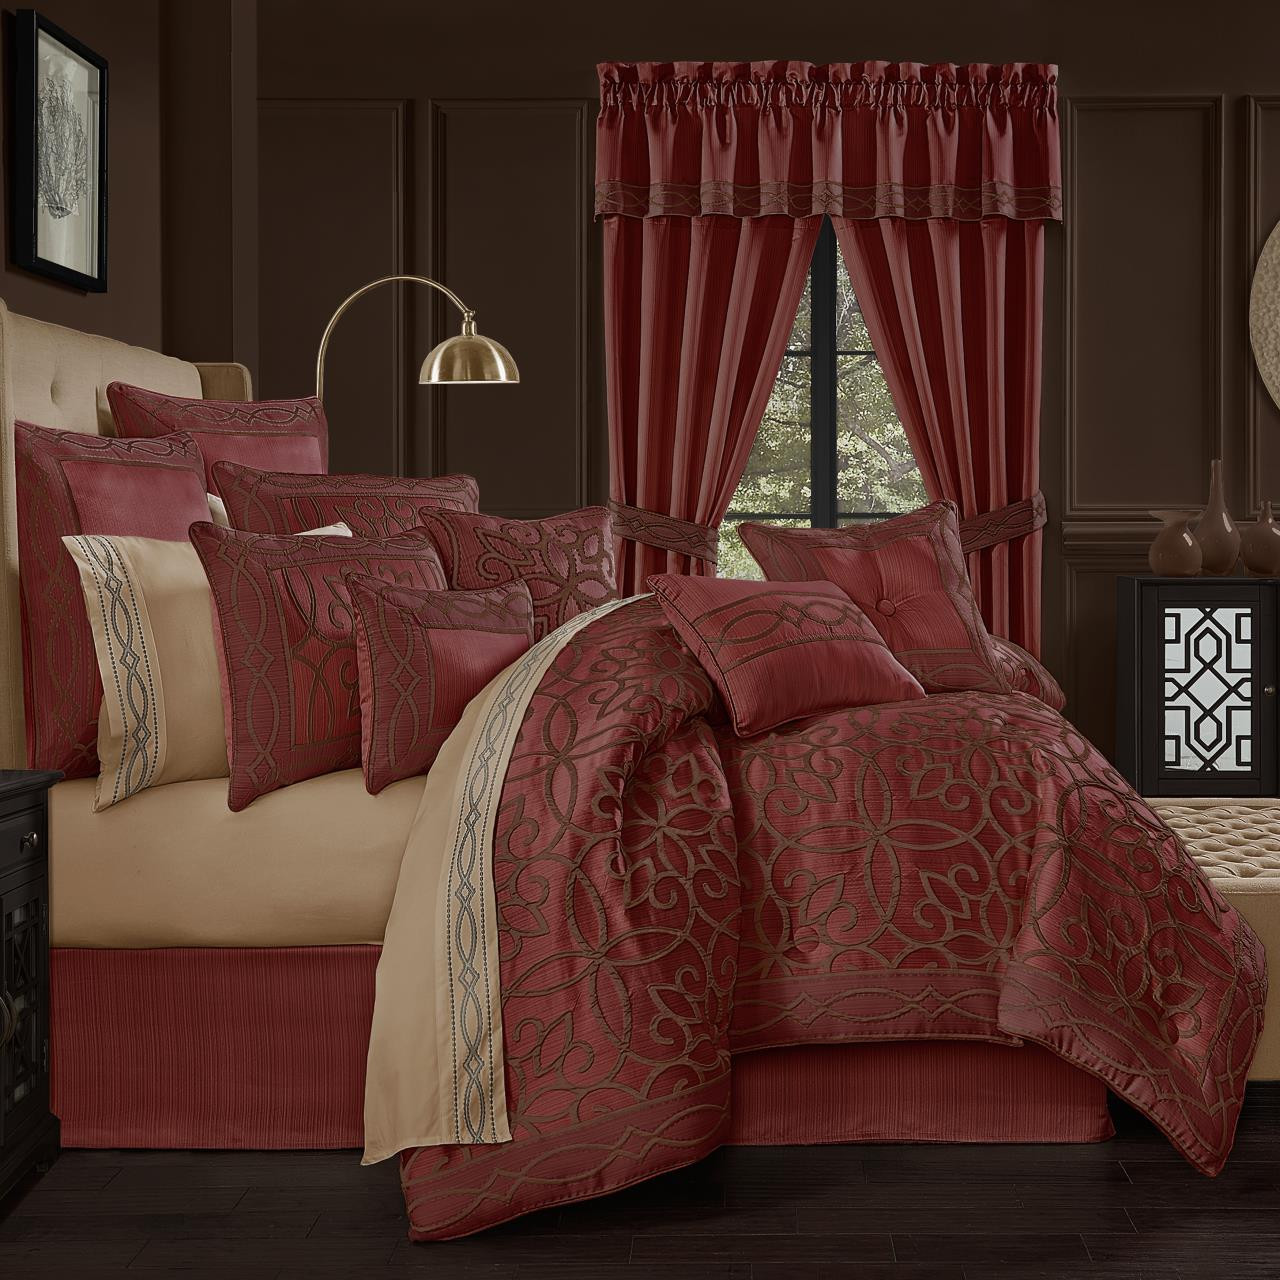 Chianti Red Bedding Collection -